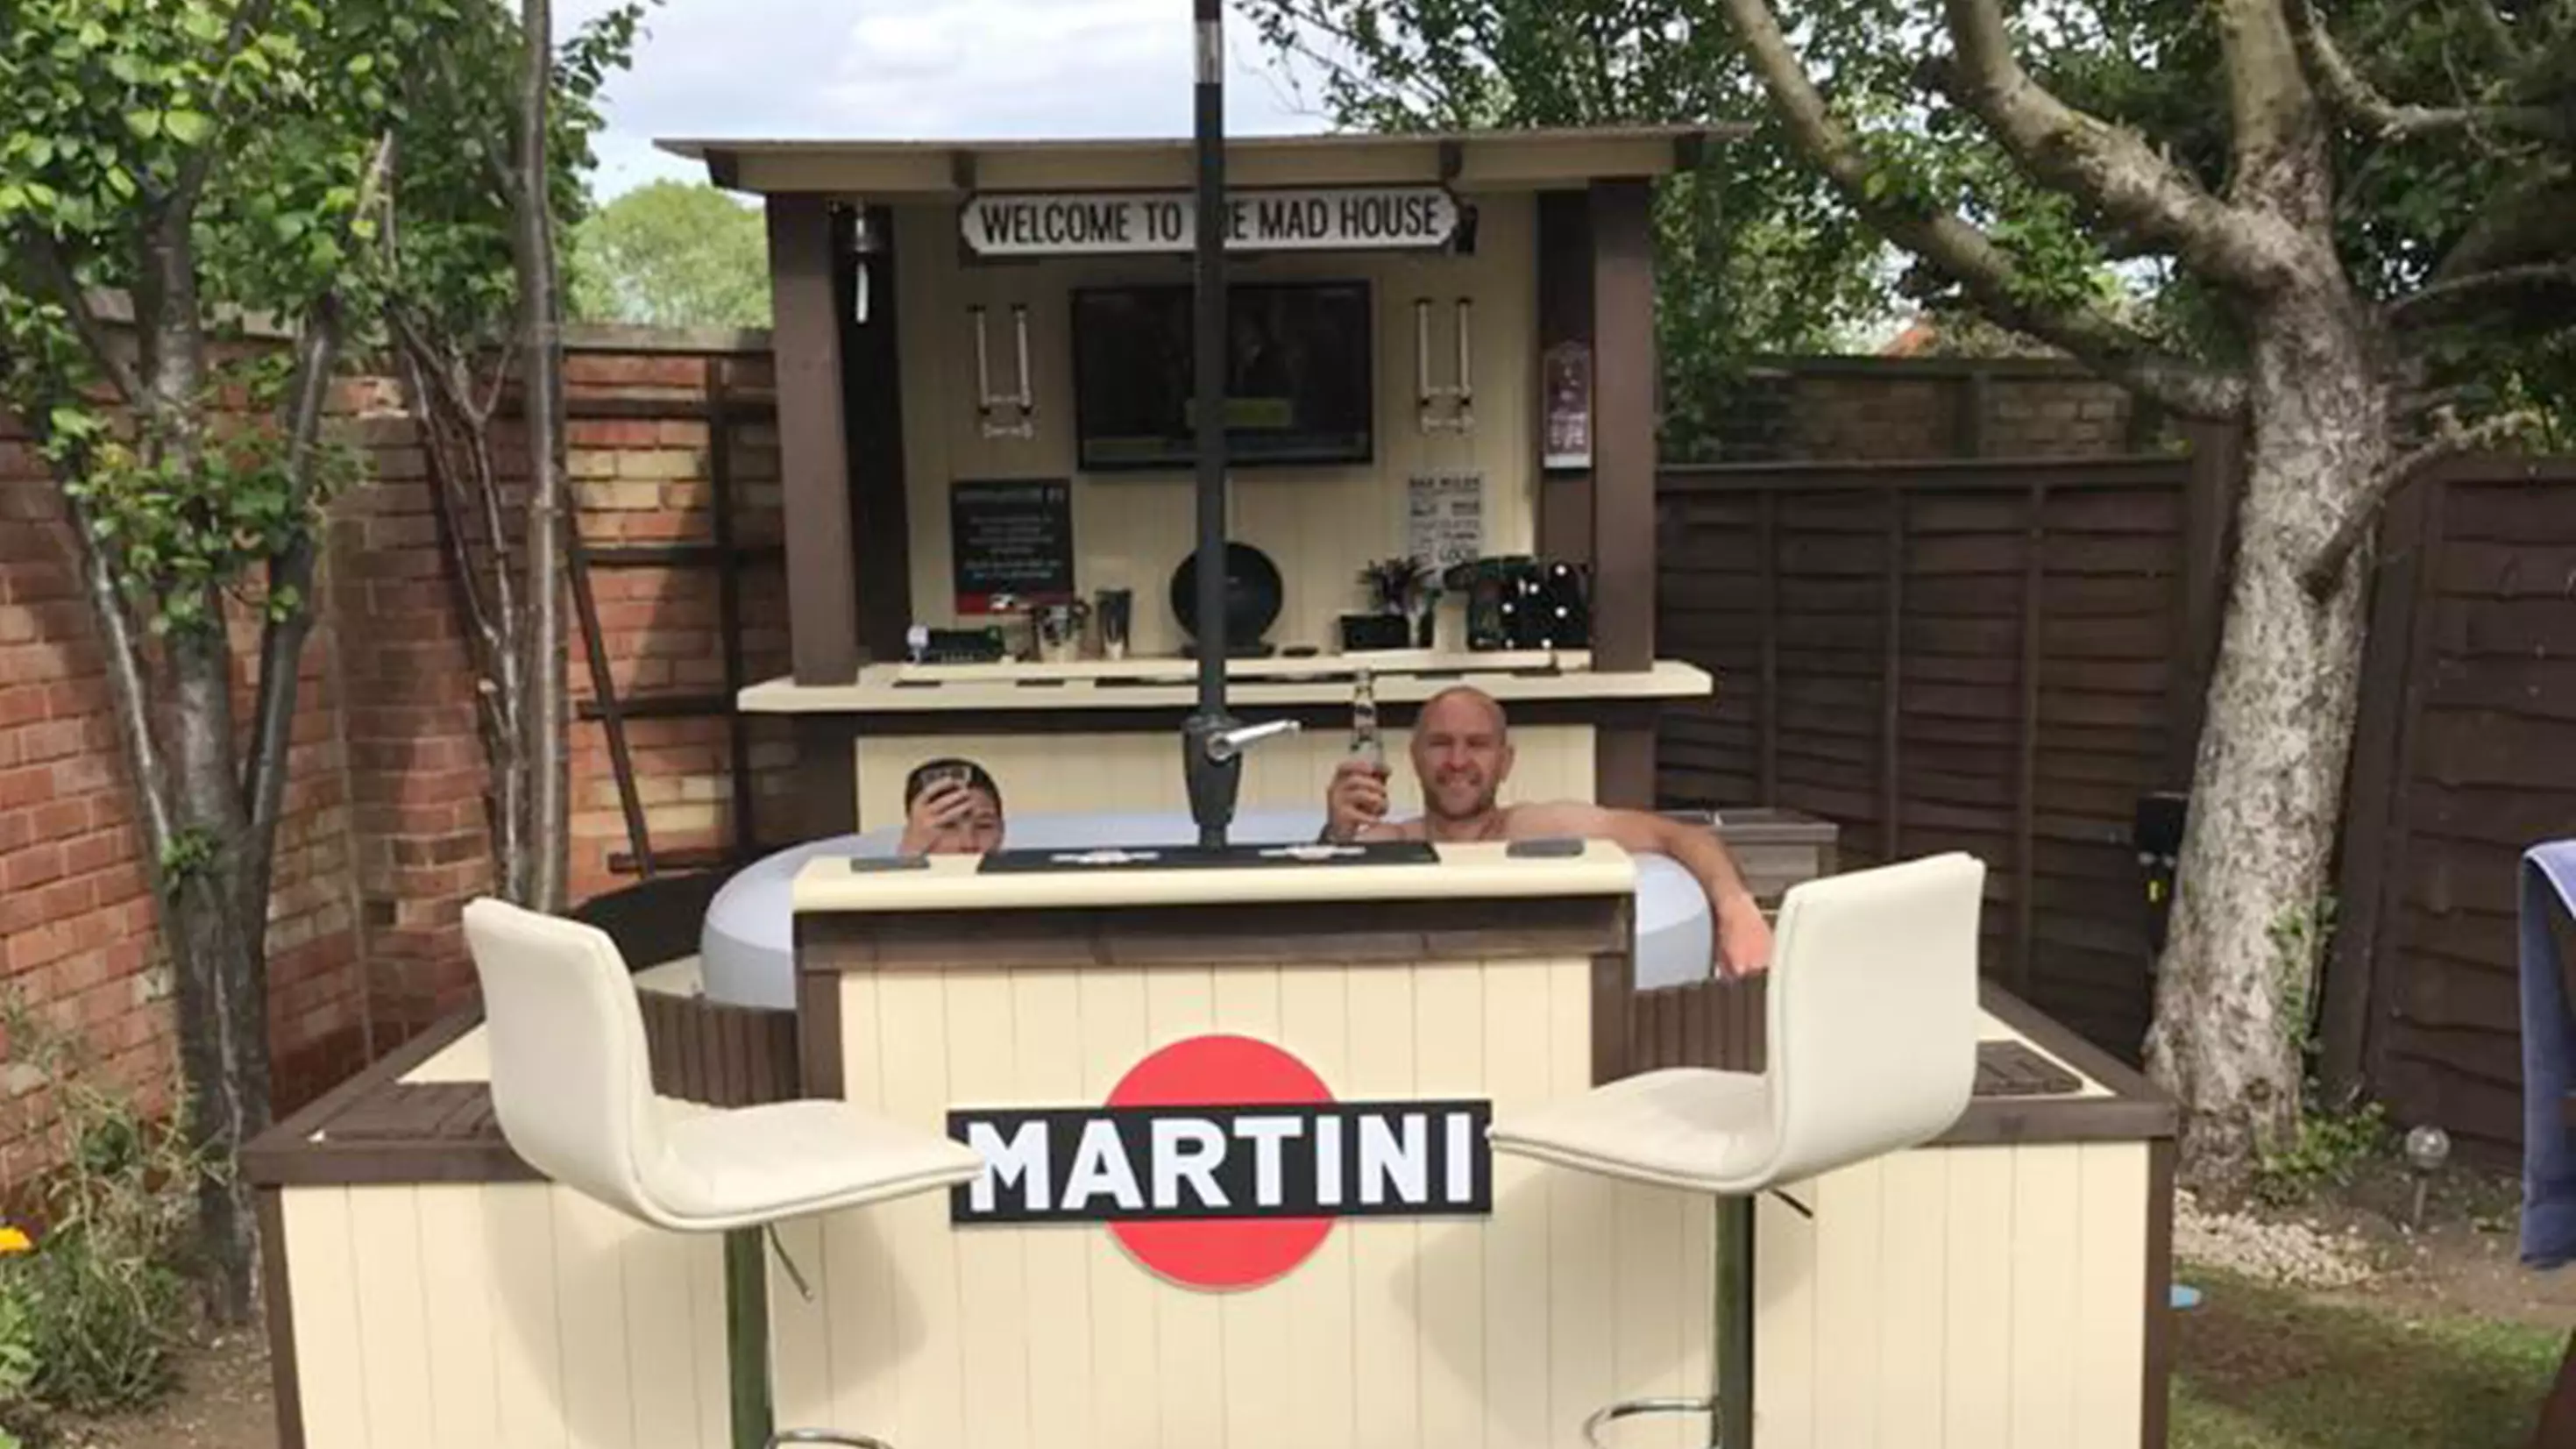 Family Build Their Own Swim-Up Bar In Their Garden And It's Amazing